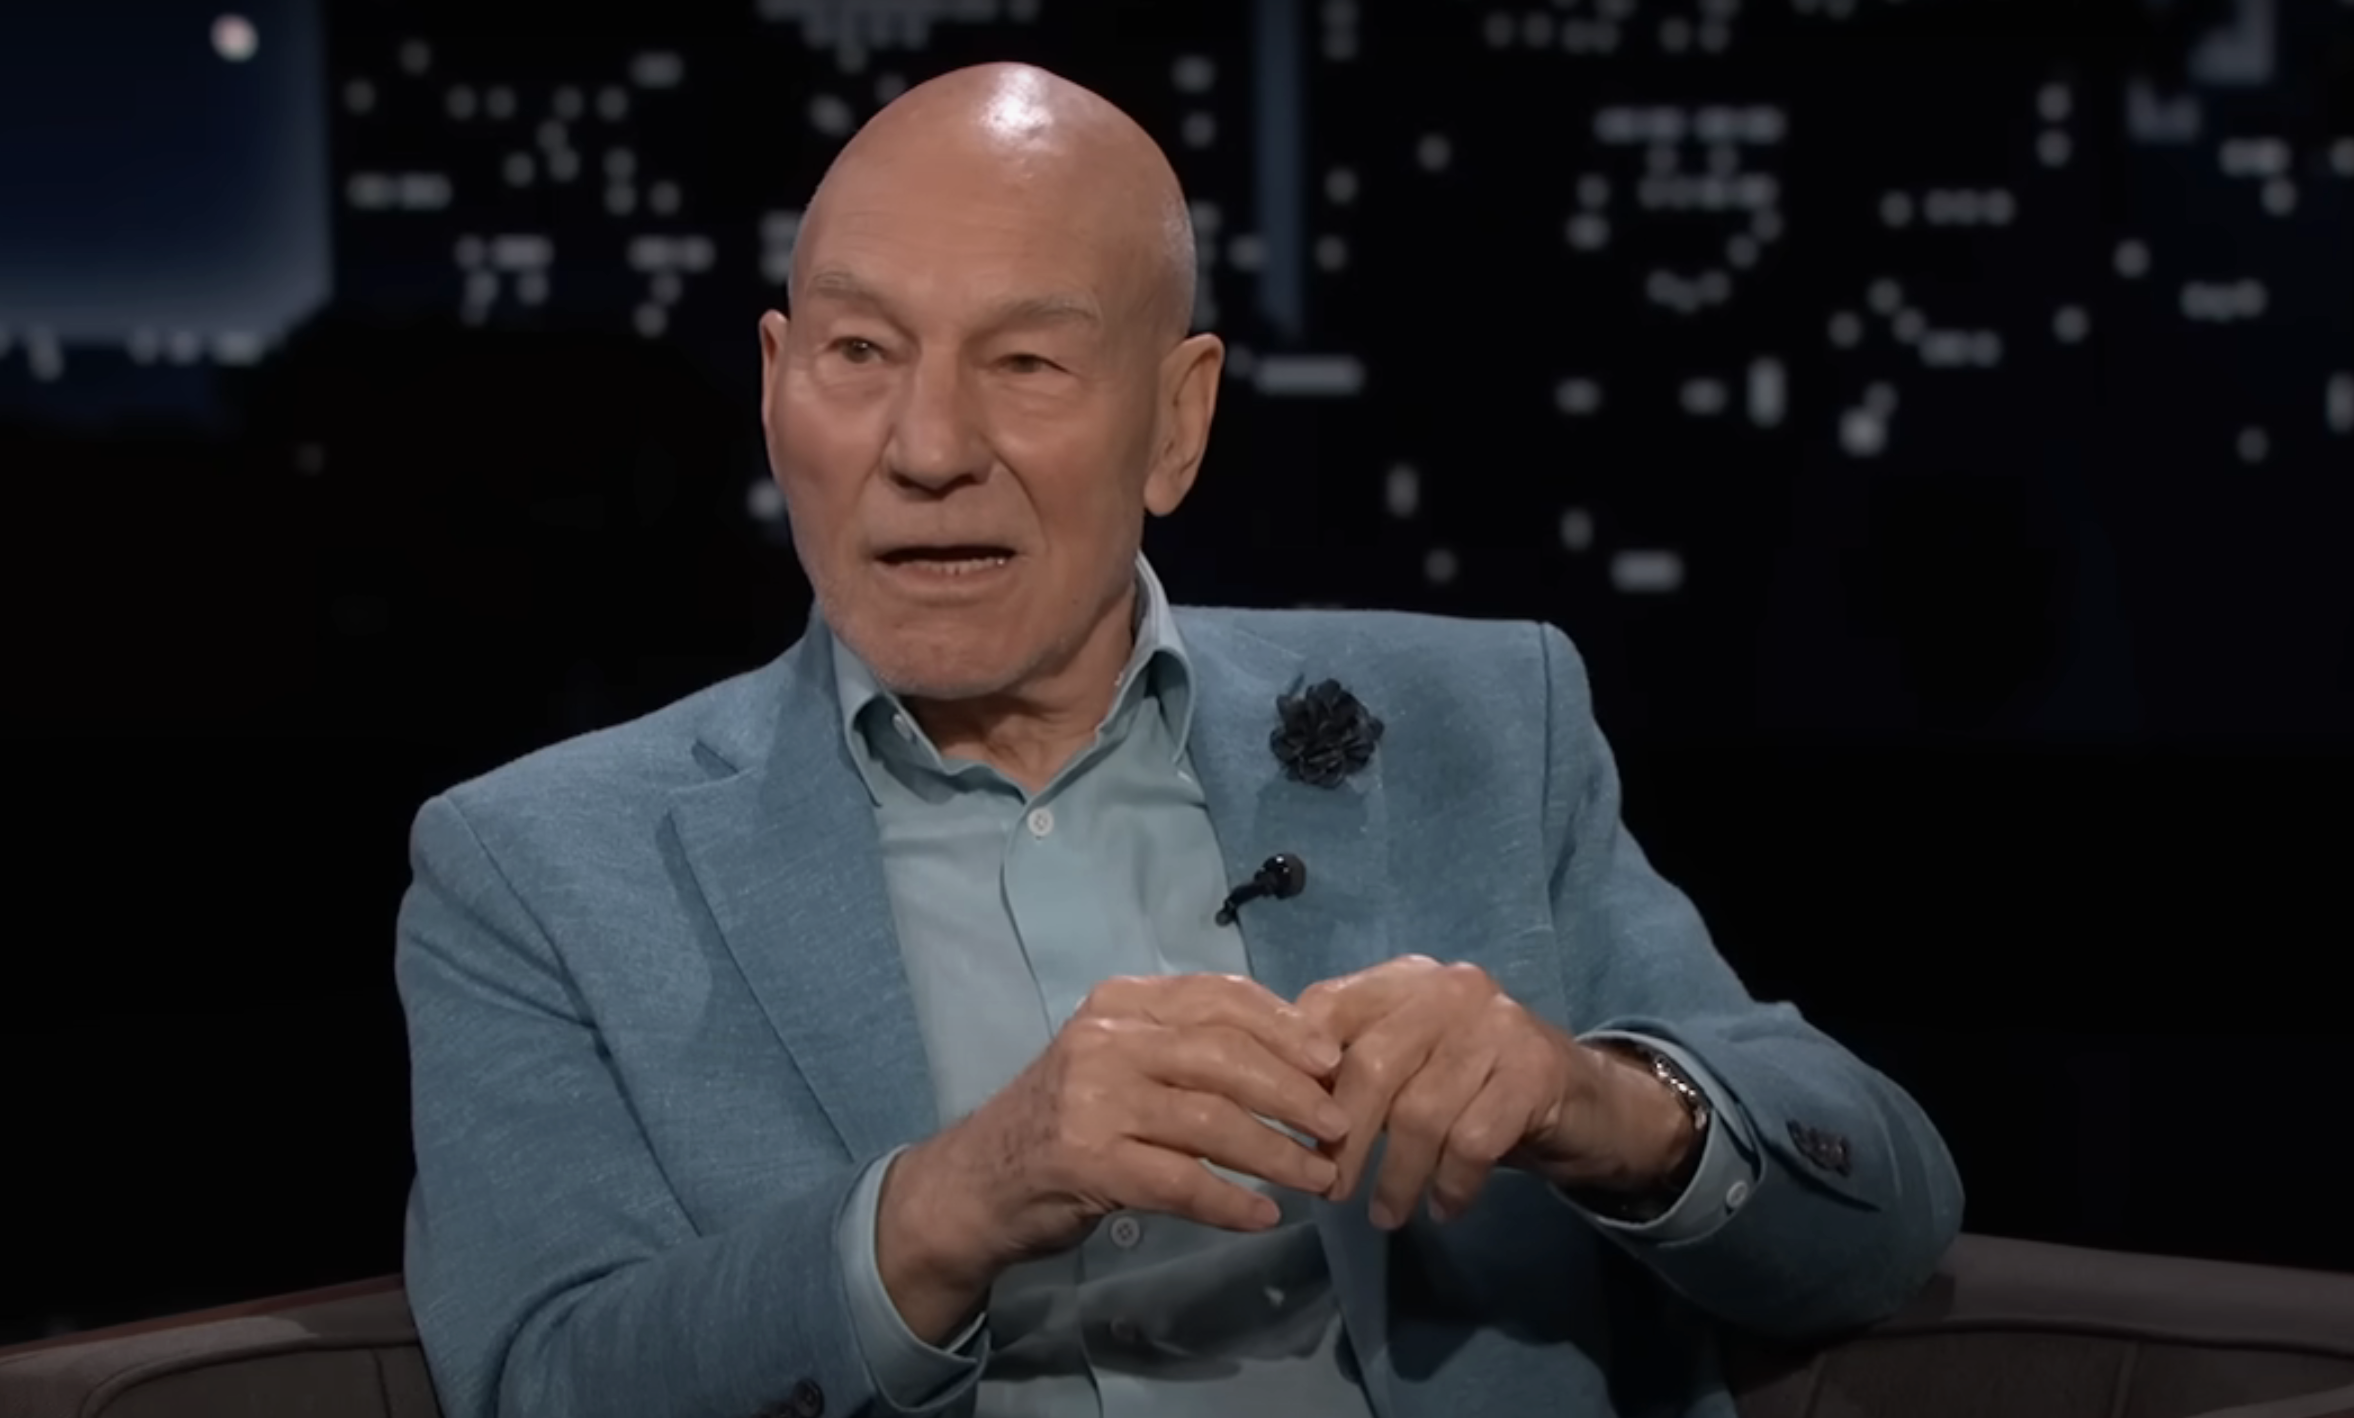 Patrick Stewart sitting, wearing a light blue suit, on a talk show with a cityscape backdrop